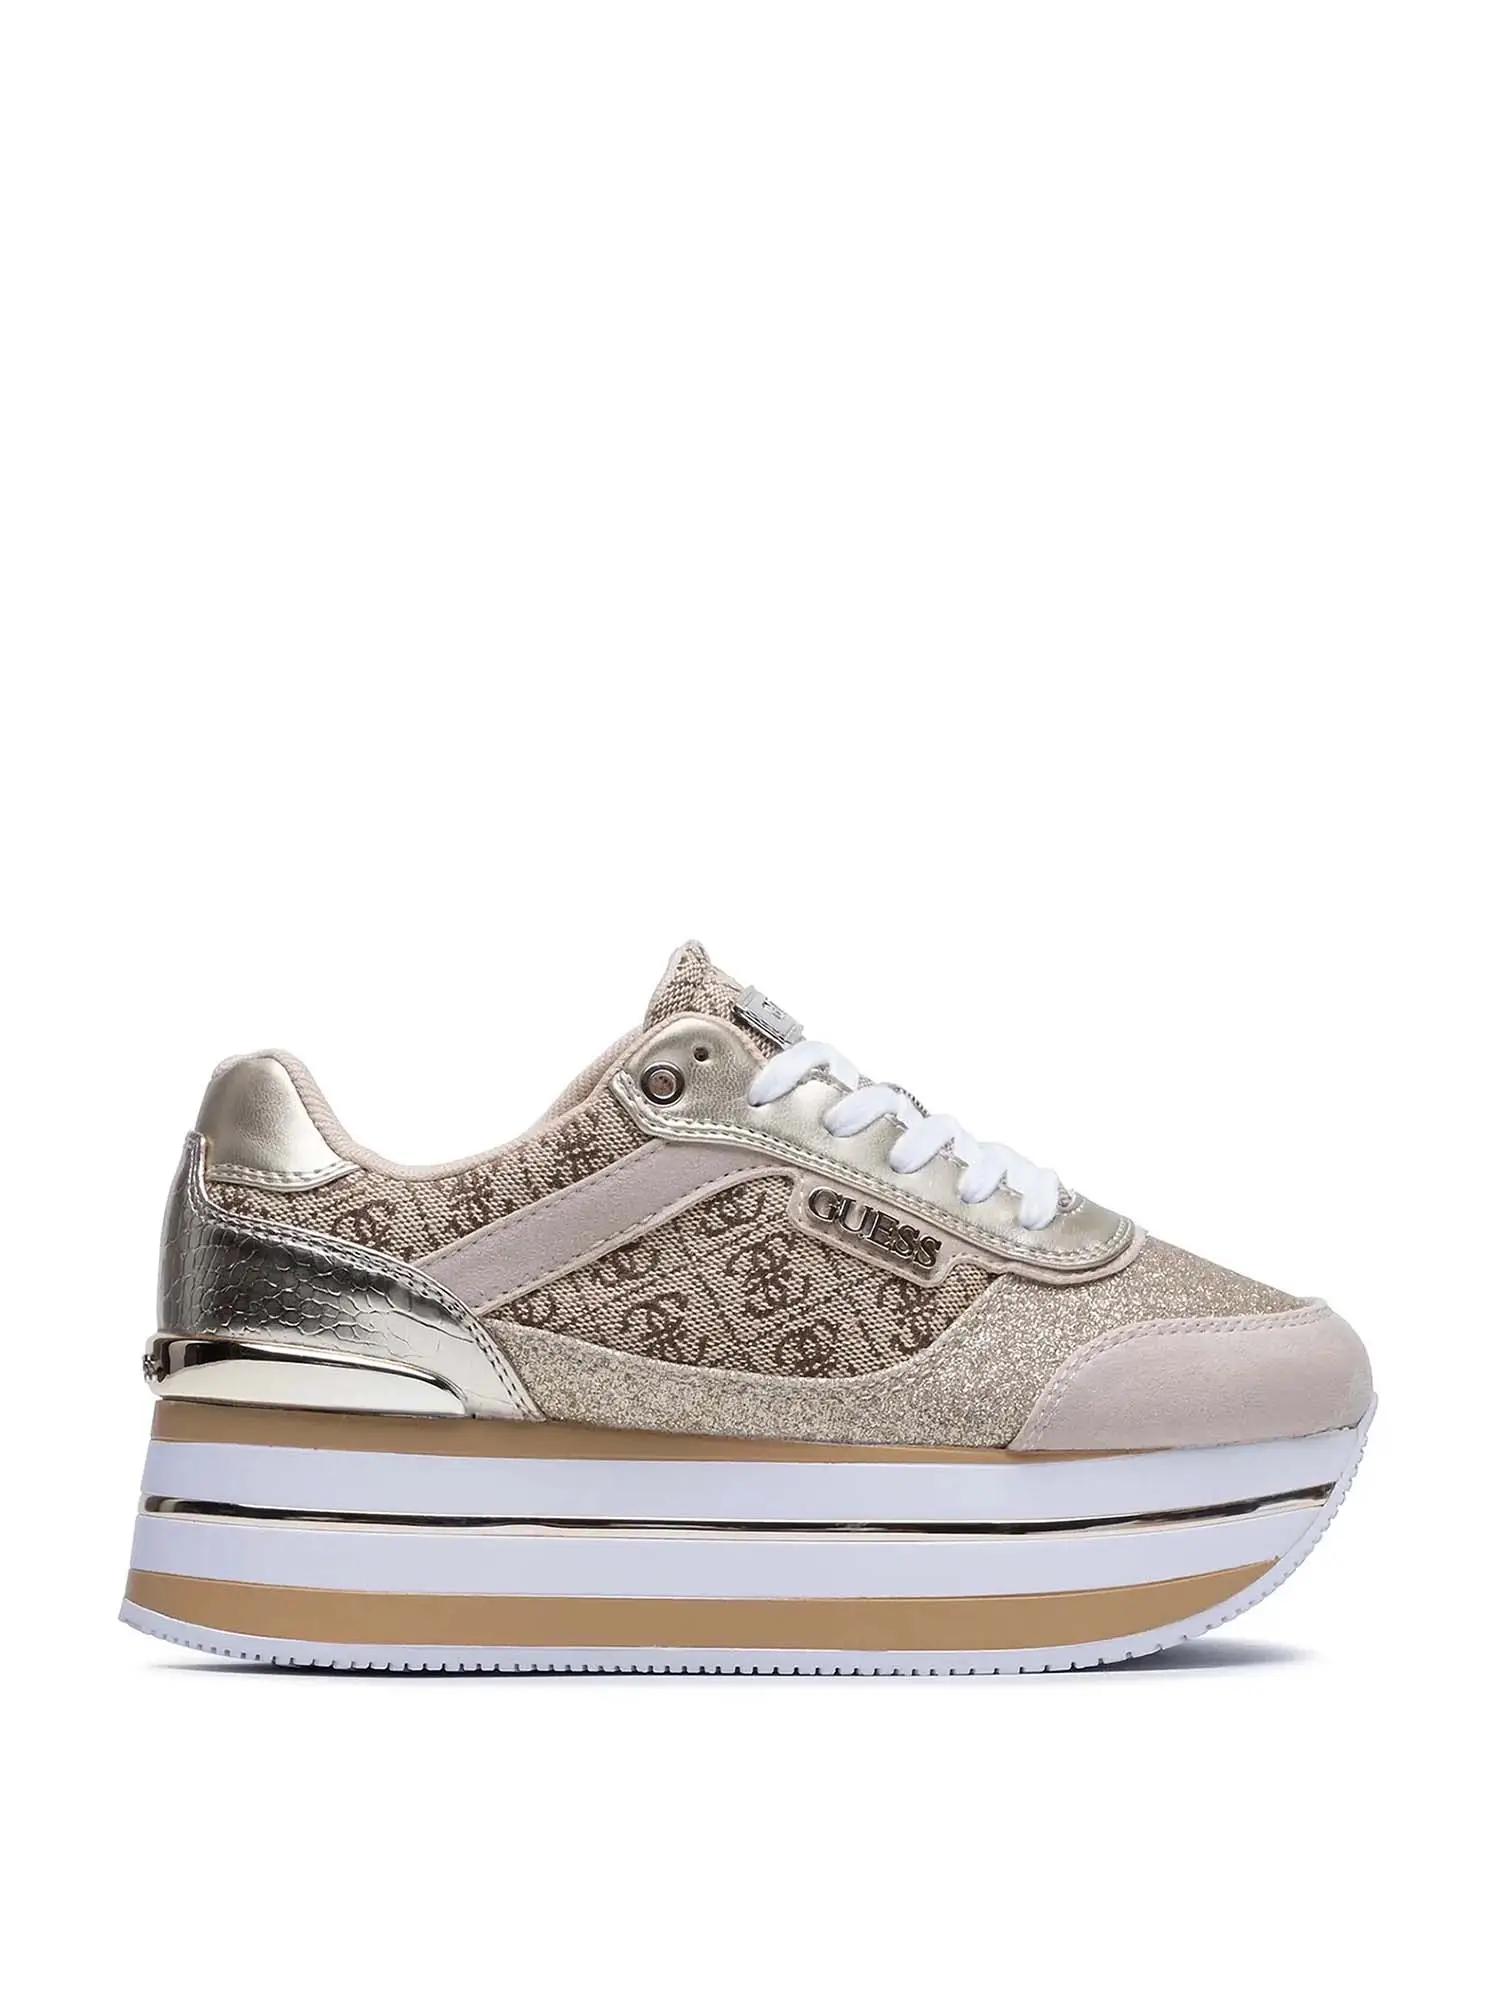 SNEAKERS DONNA - GUESS - FL5HNS FAL12 - BEIGE/MARRONE, 39